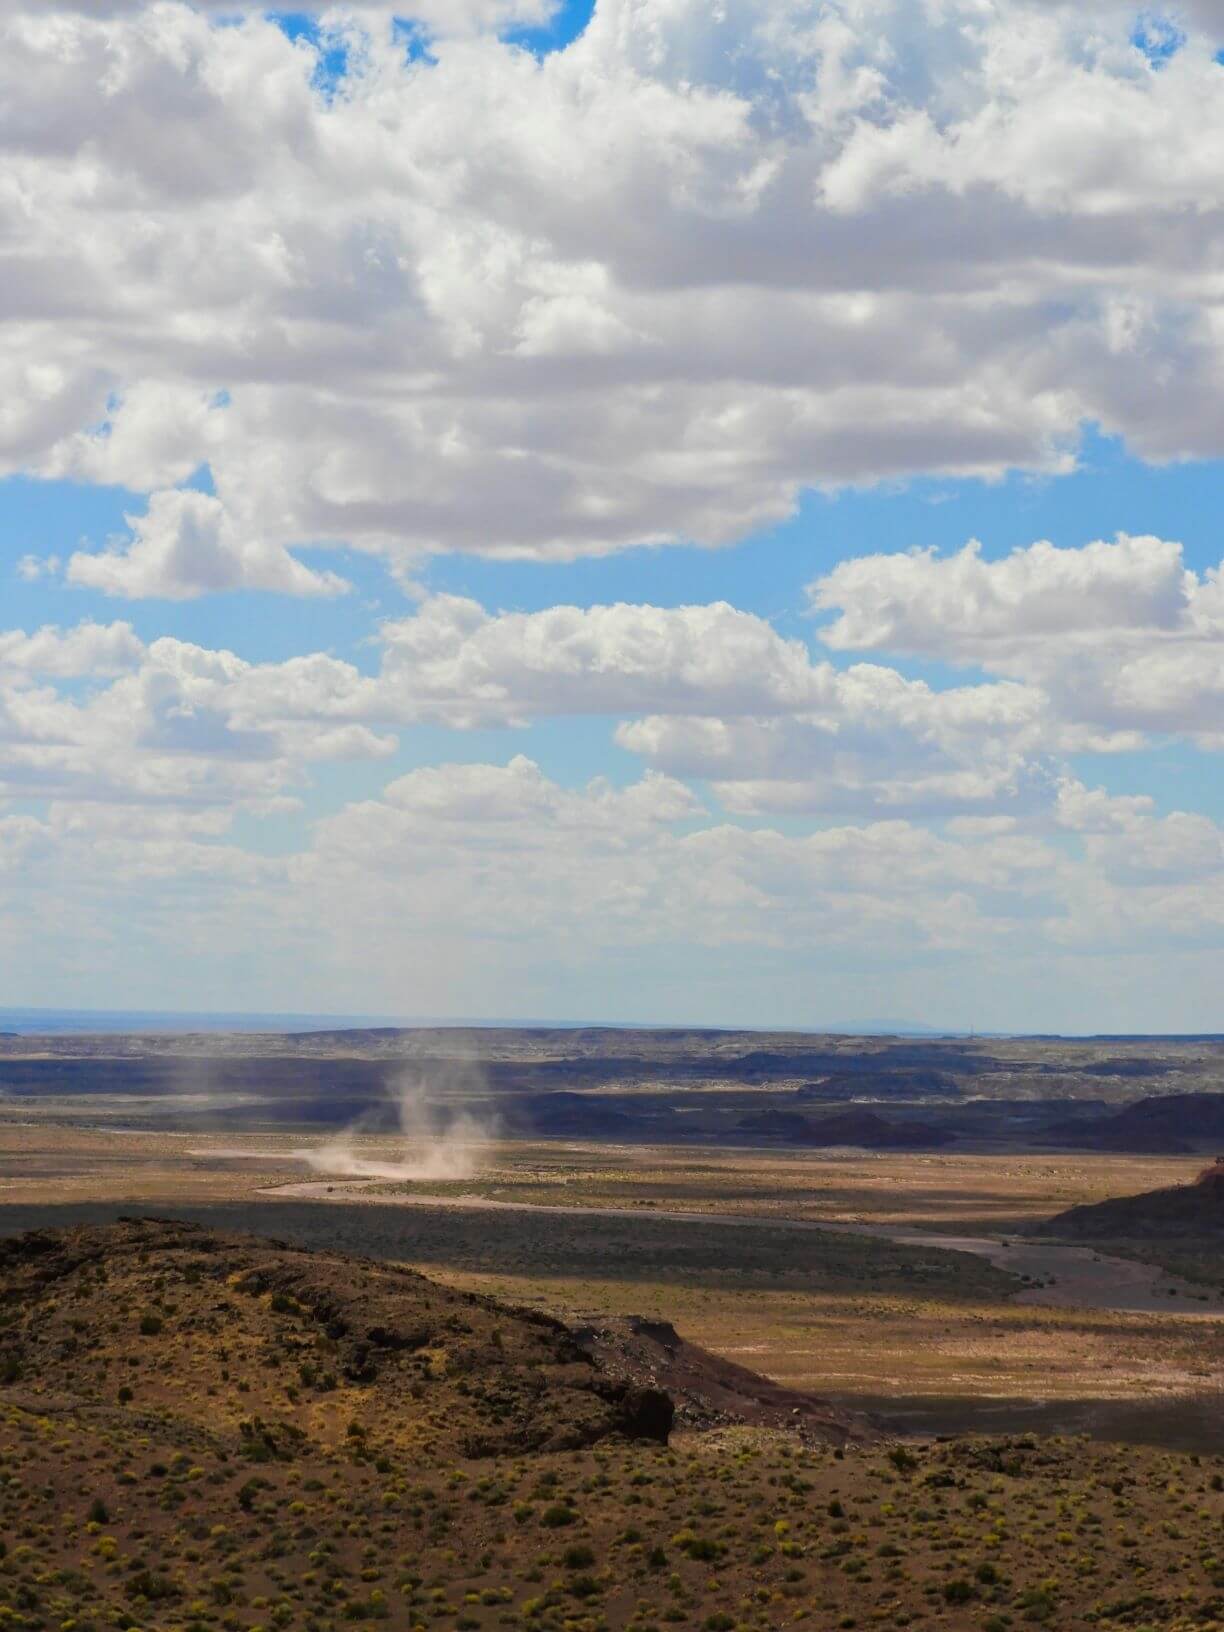 A desert landscape with a small dirt storm in the distance